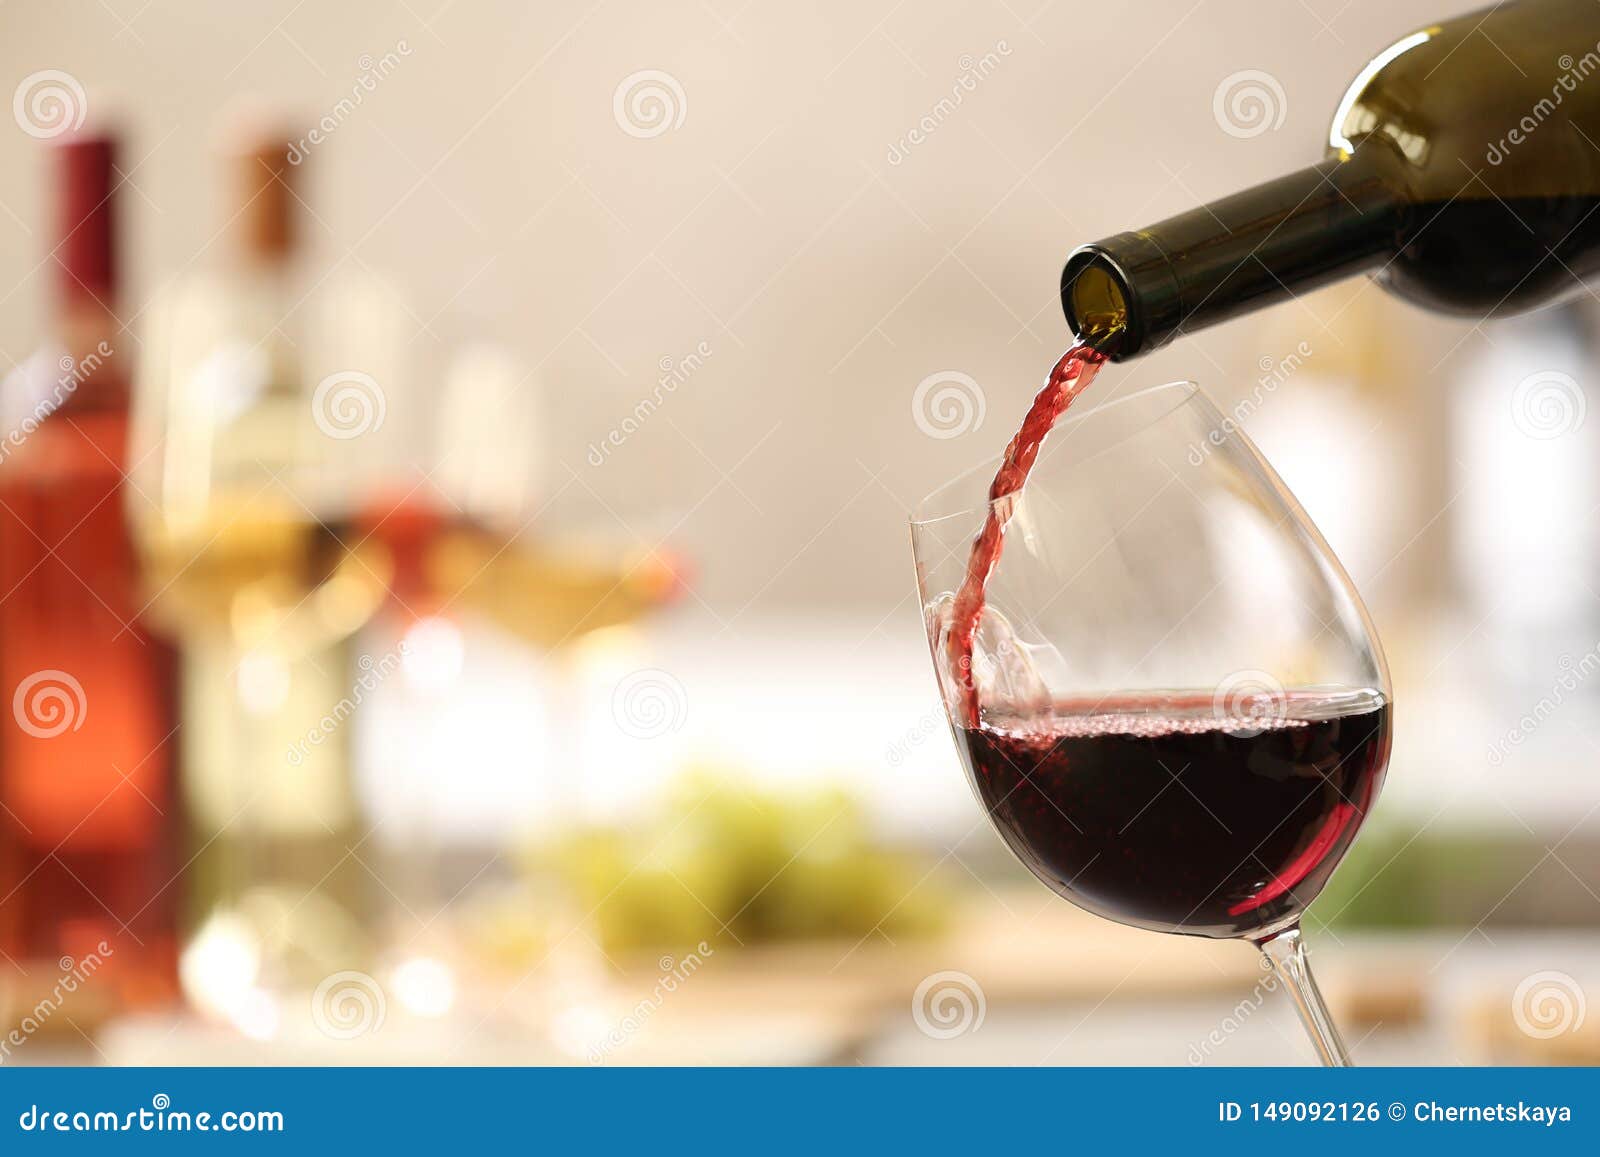 pouring red wine from bottle into glass on blurred background